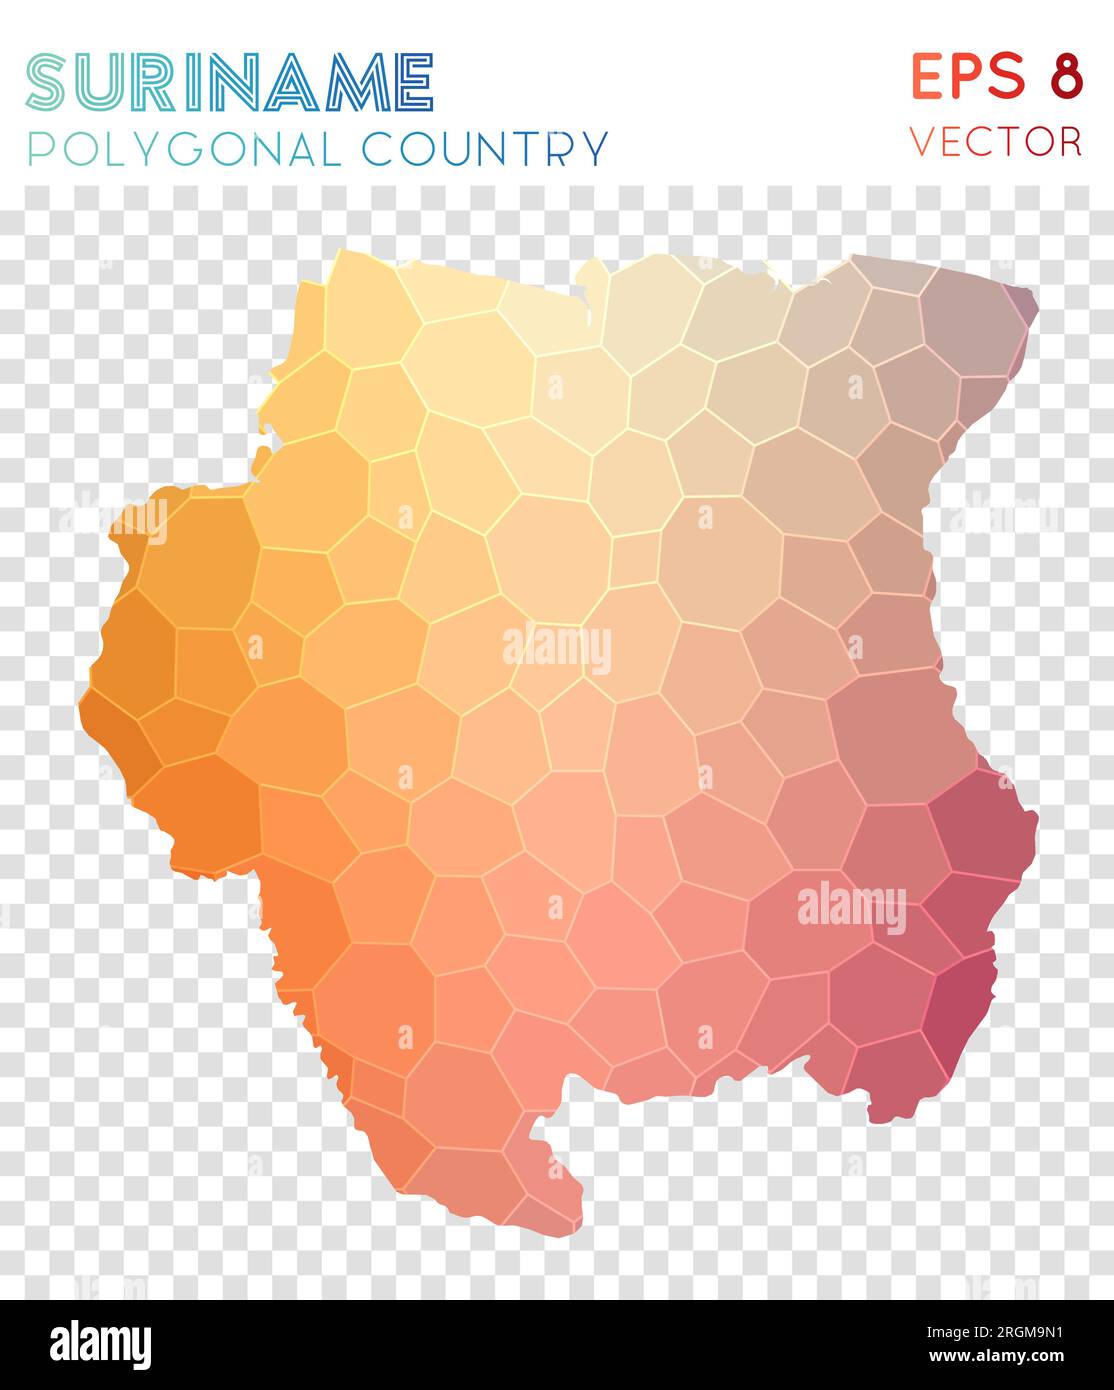 Suriname polygonal map, mosaic style country. Cool low poly style, modern design. Suriname polygonal map for infographics or presentation. Stock Vector